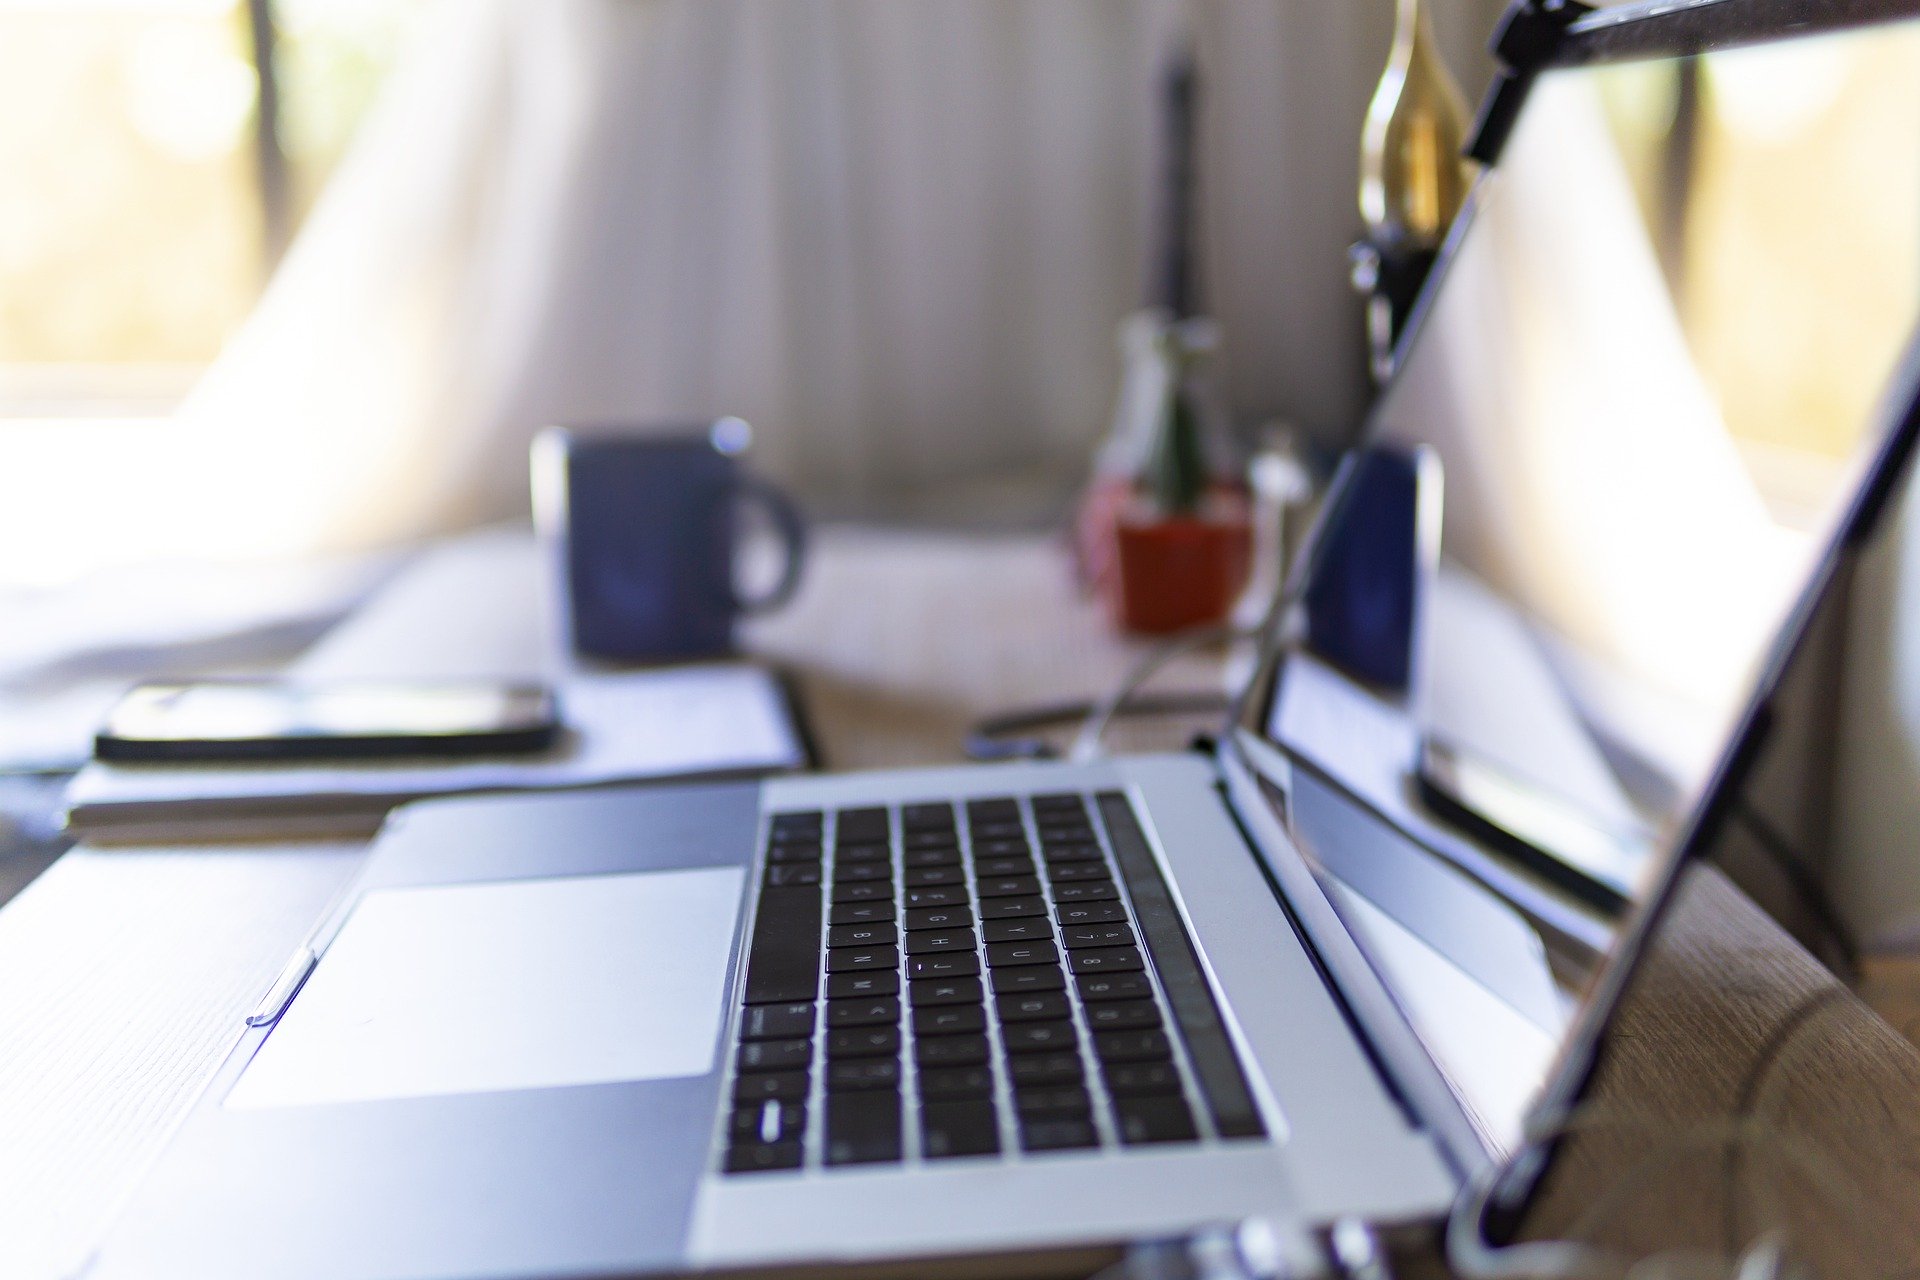 Lifestyle image showing a close up of an open laptop on a home office desk